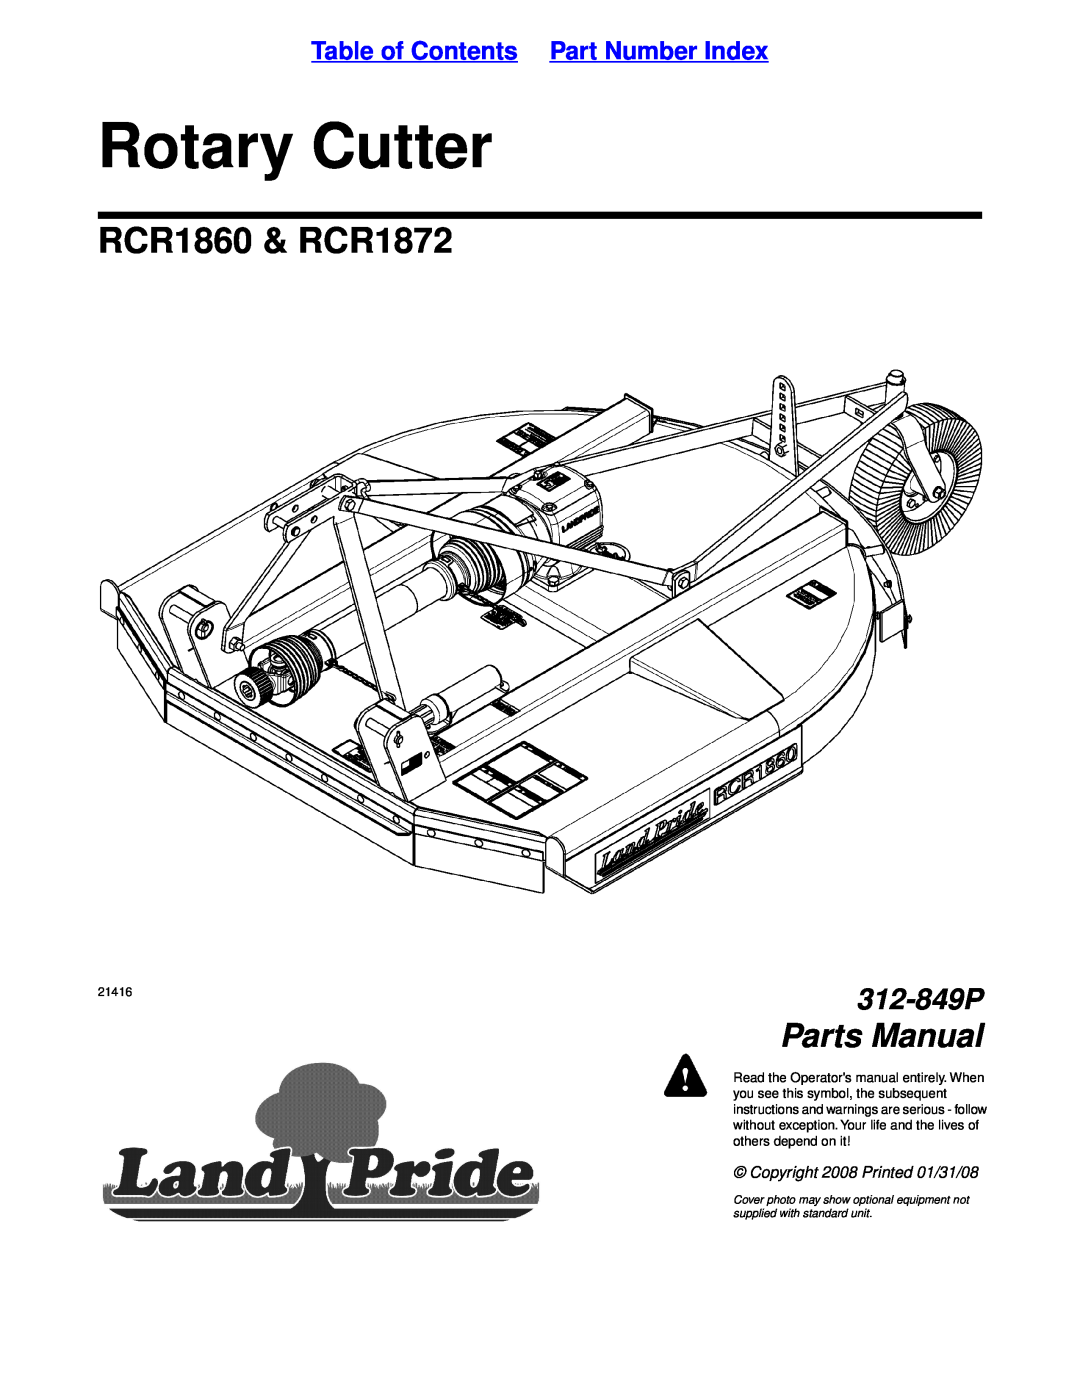 Land Pride manual Operator’s Manual, Table of Contents, Rotary Cutters, RCR1860 and RCR1872 Series, 312-849M, 12/17/07 